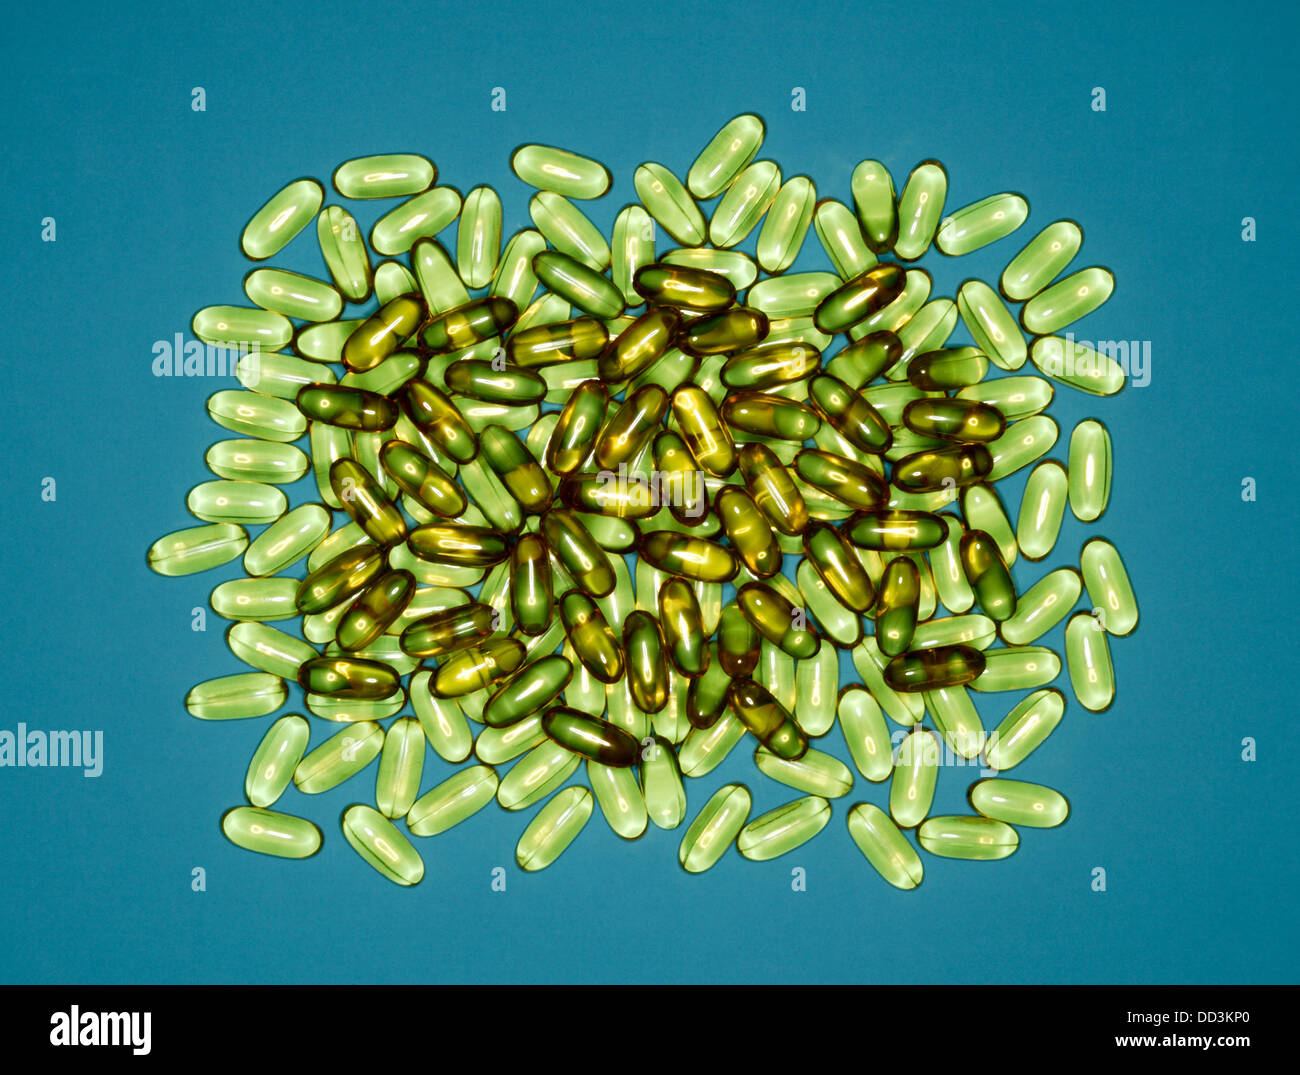 A large group of green capsule pills on a blue background Stock Photo